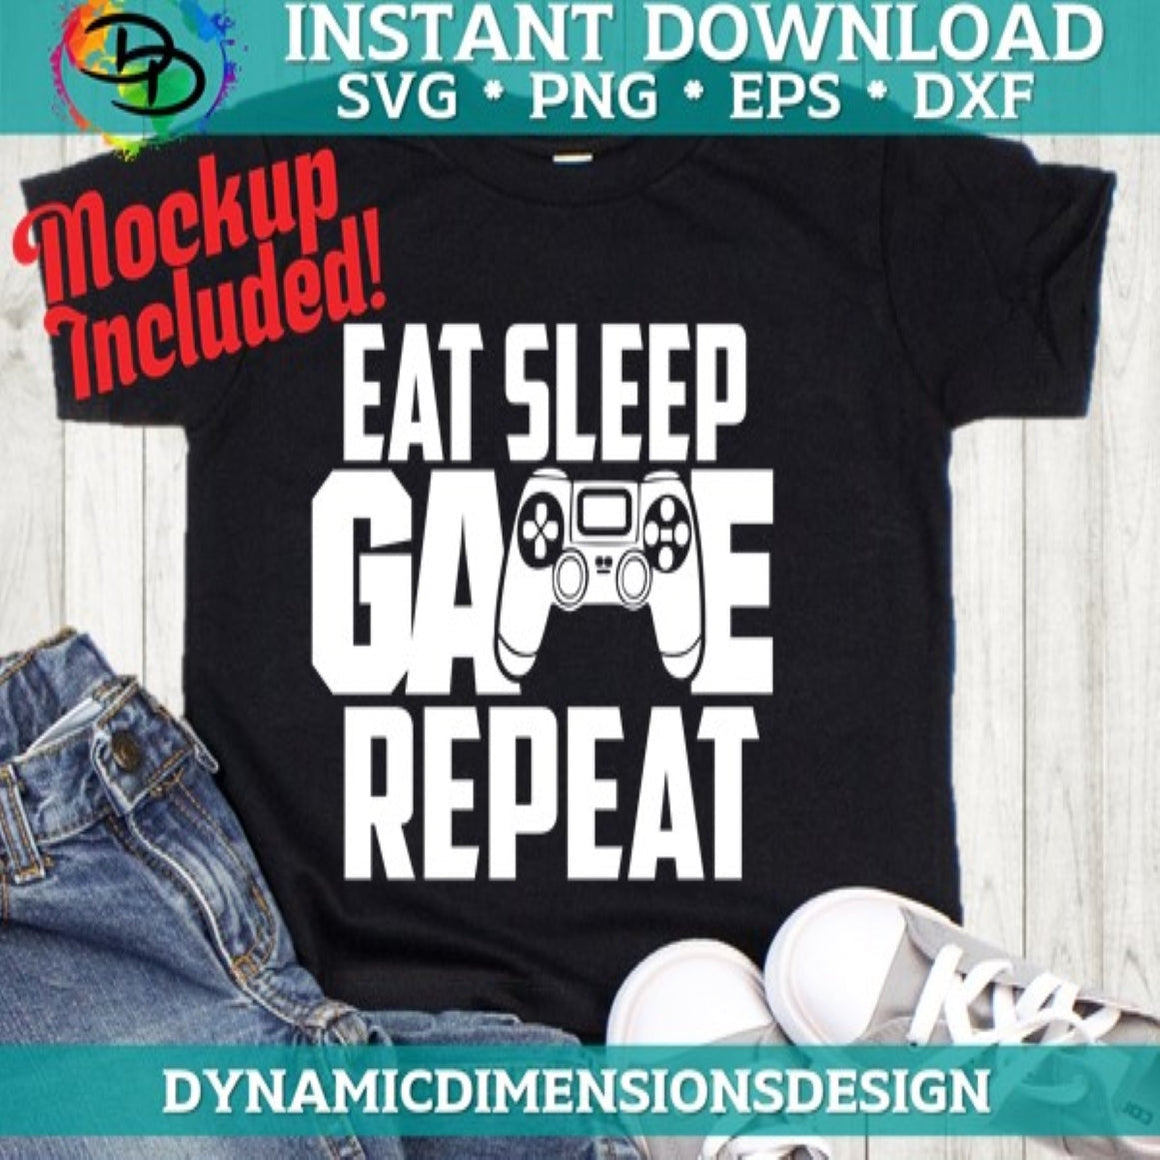 Eat Sleep Game Repeat svg, png, instant download, dxf, eps, pdf, jpg, cricut, silhouette, sublimtion, printable